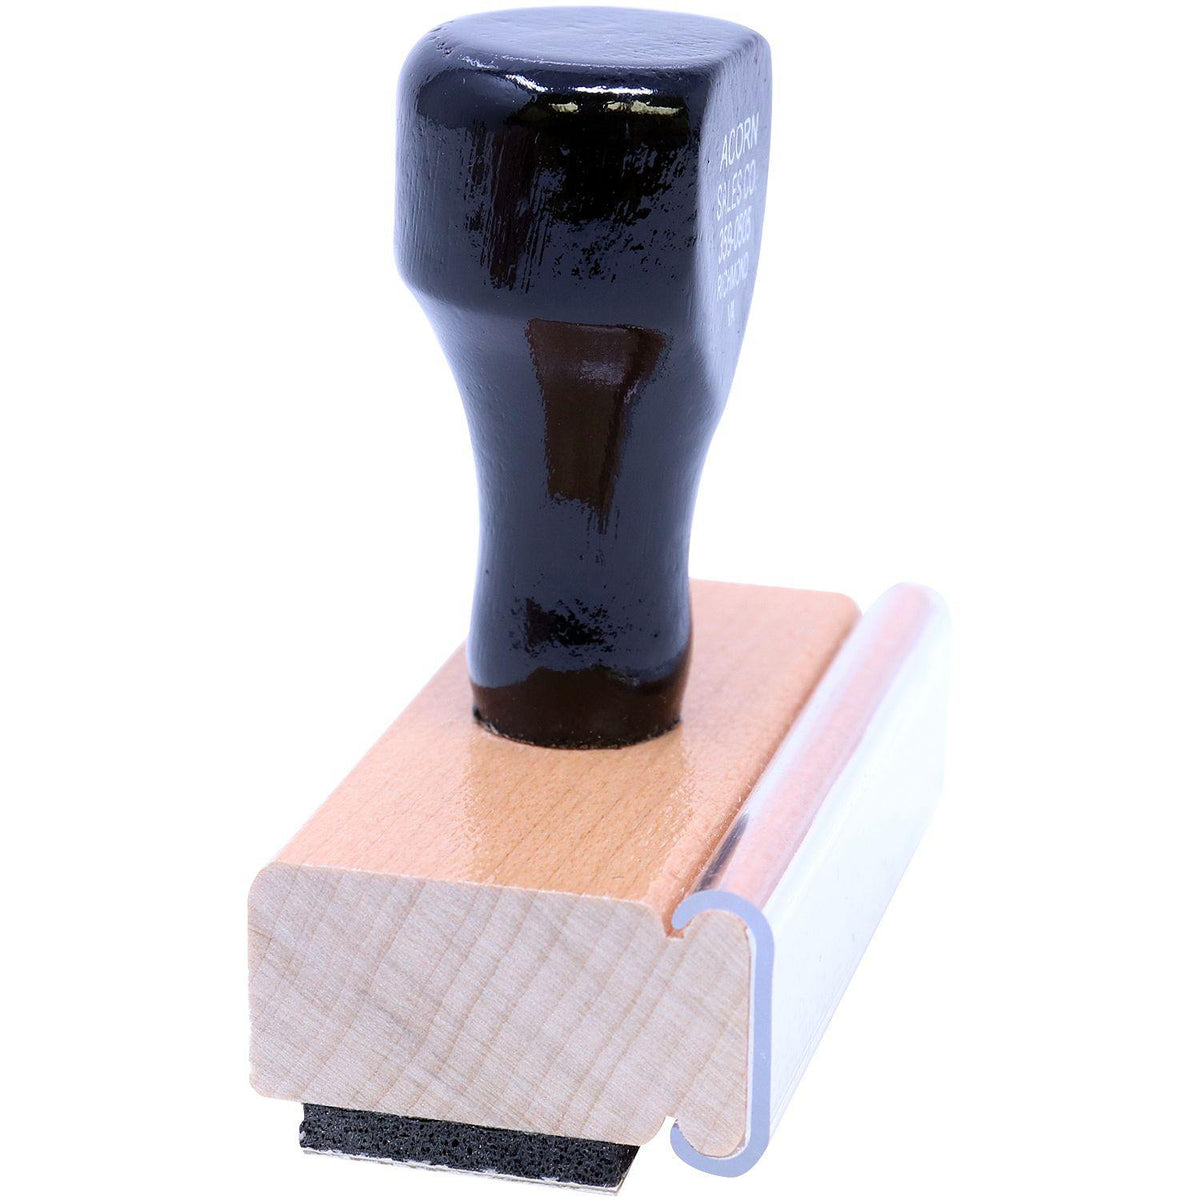 Side View of Vehicle Loans Rubber Stamp at an Angle